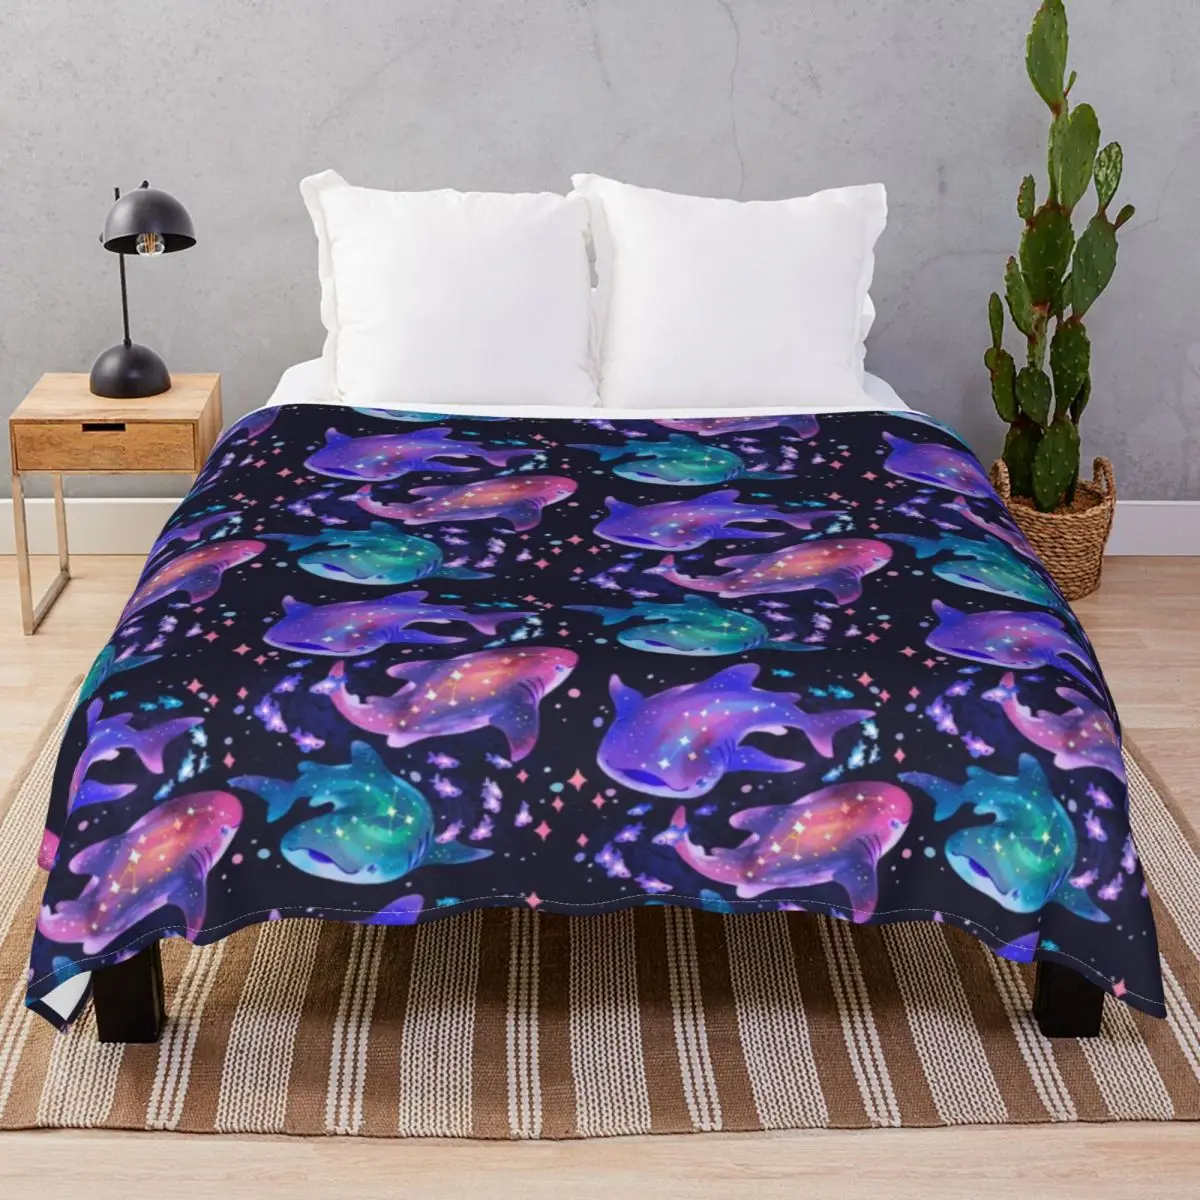 Cosmic Whale Shark Blanket Flannel Summer Multi-function Throw Blankets for Bed Home Couch Travel Office